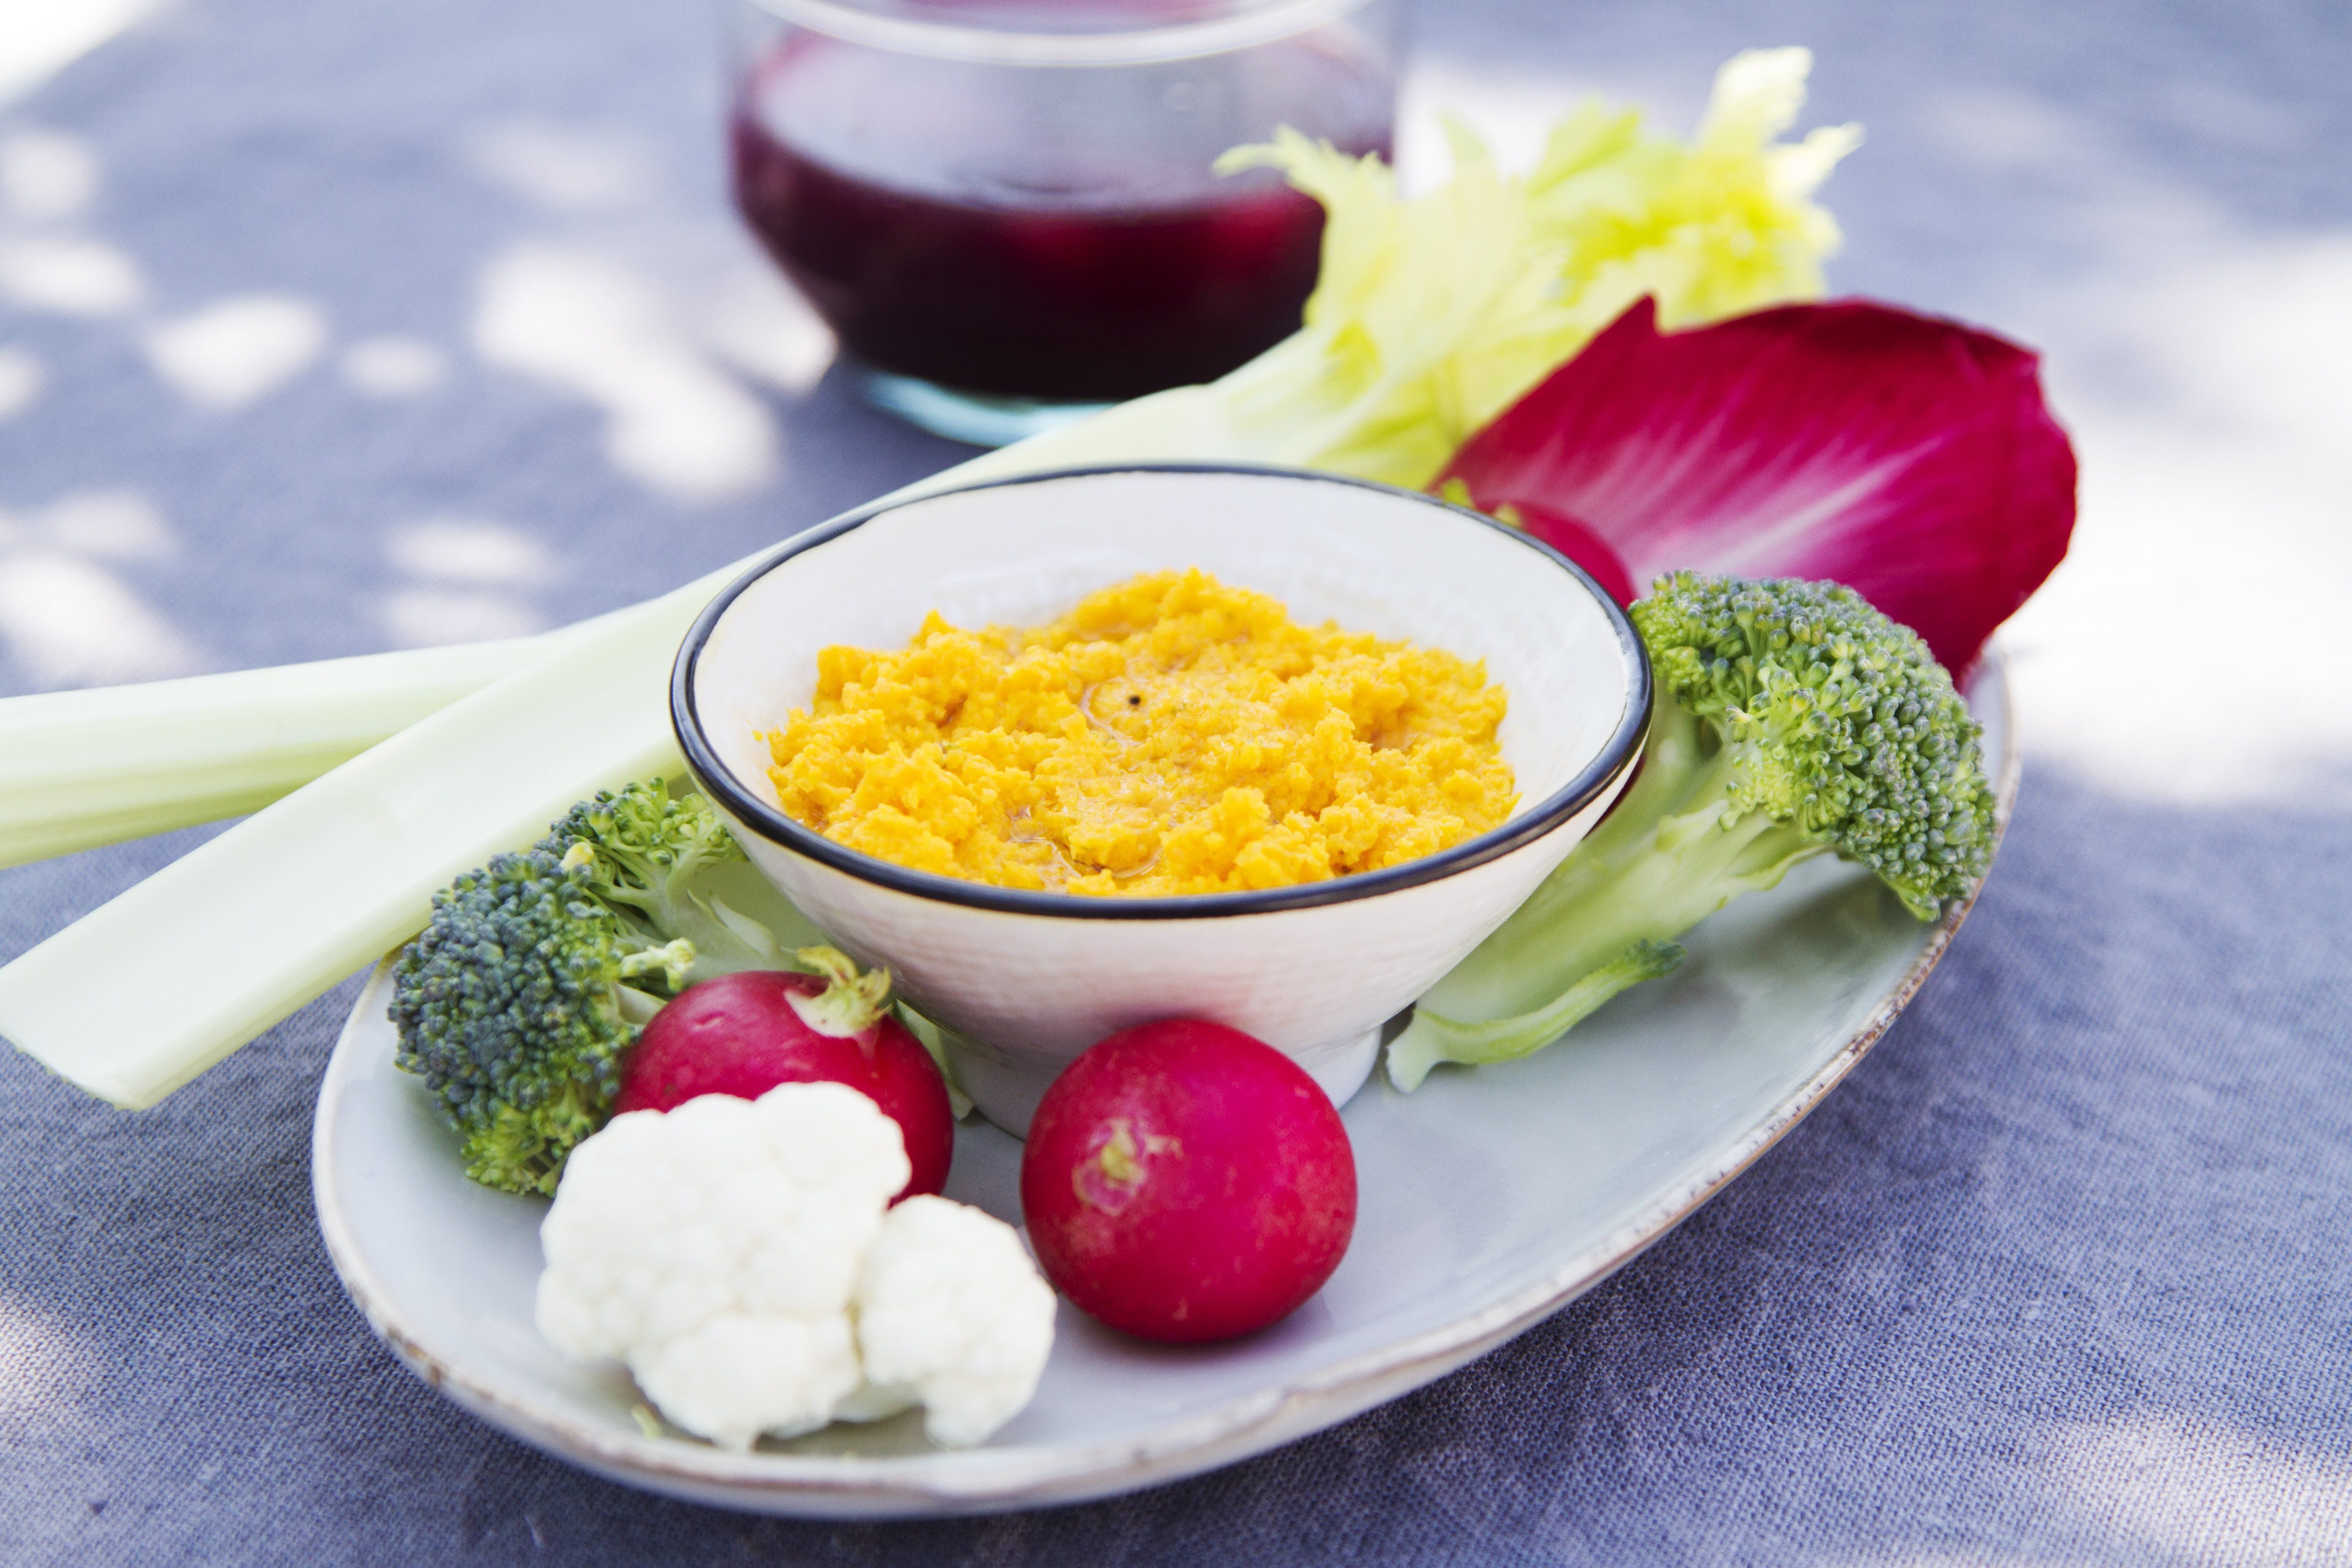 Healthy snack: Indian carrot dip with vegetables